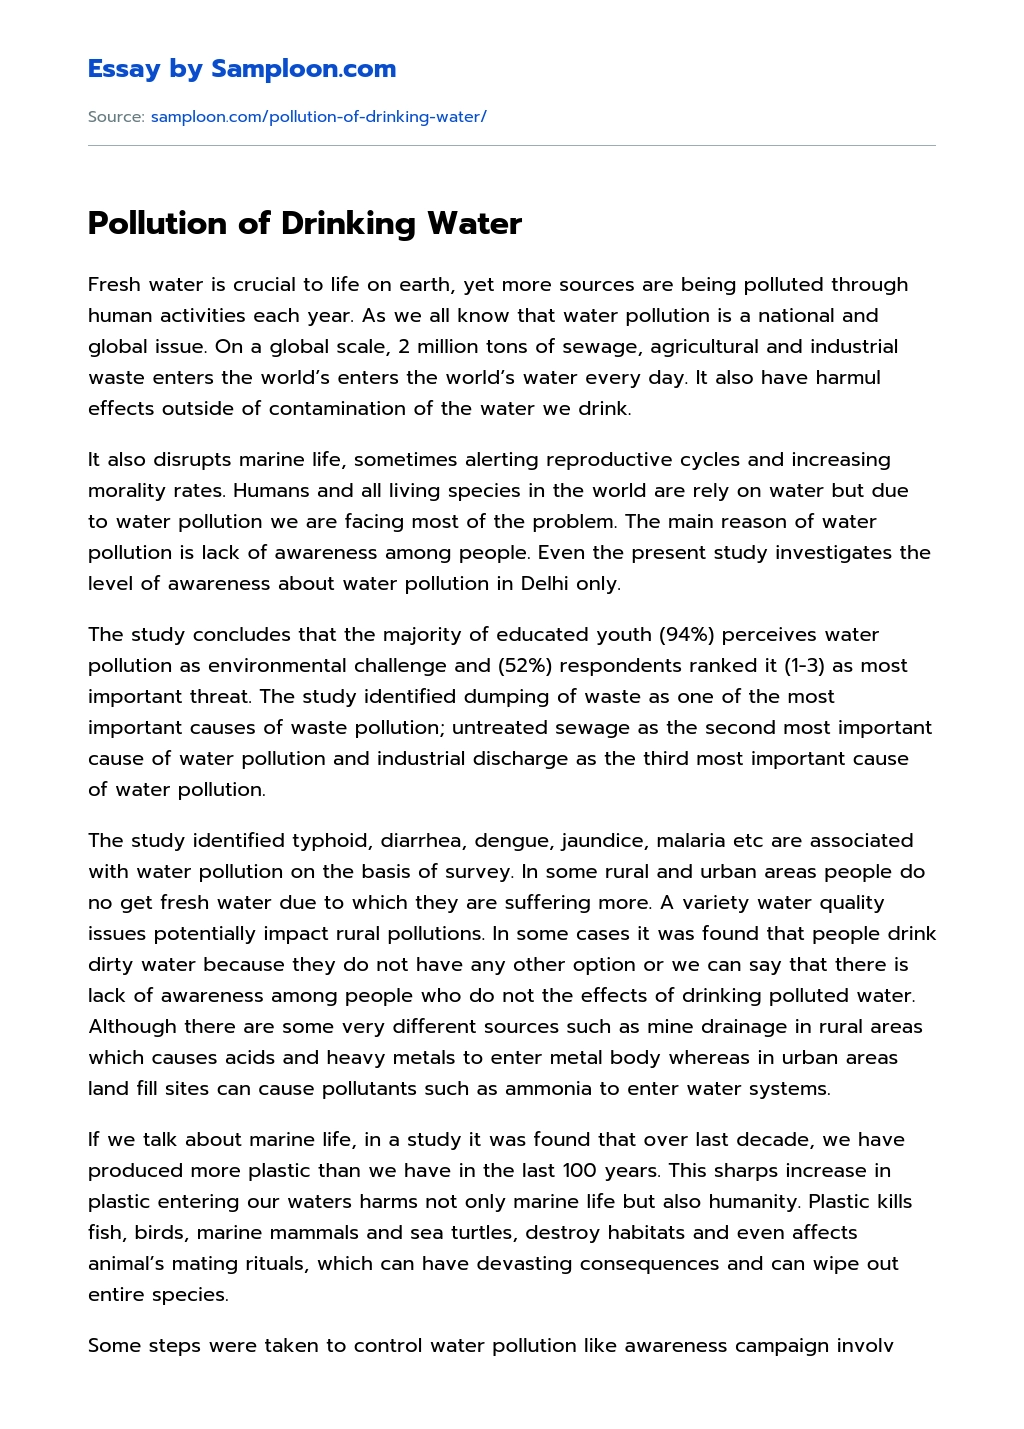 Pollution of Drinking Water essay